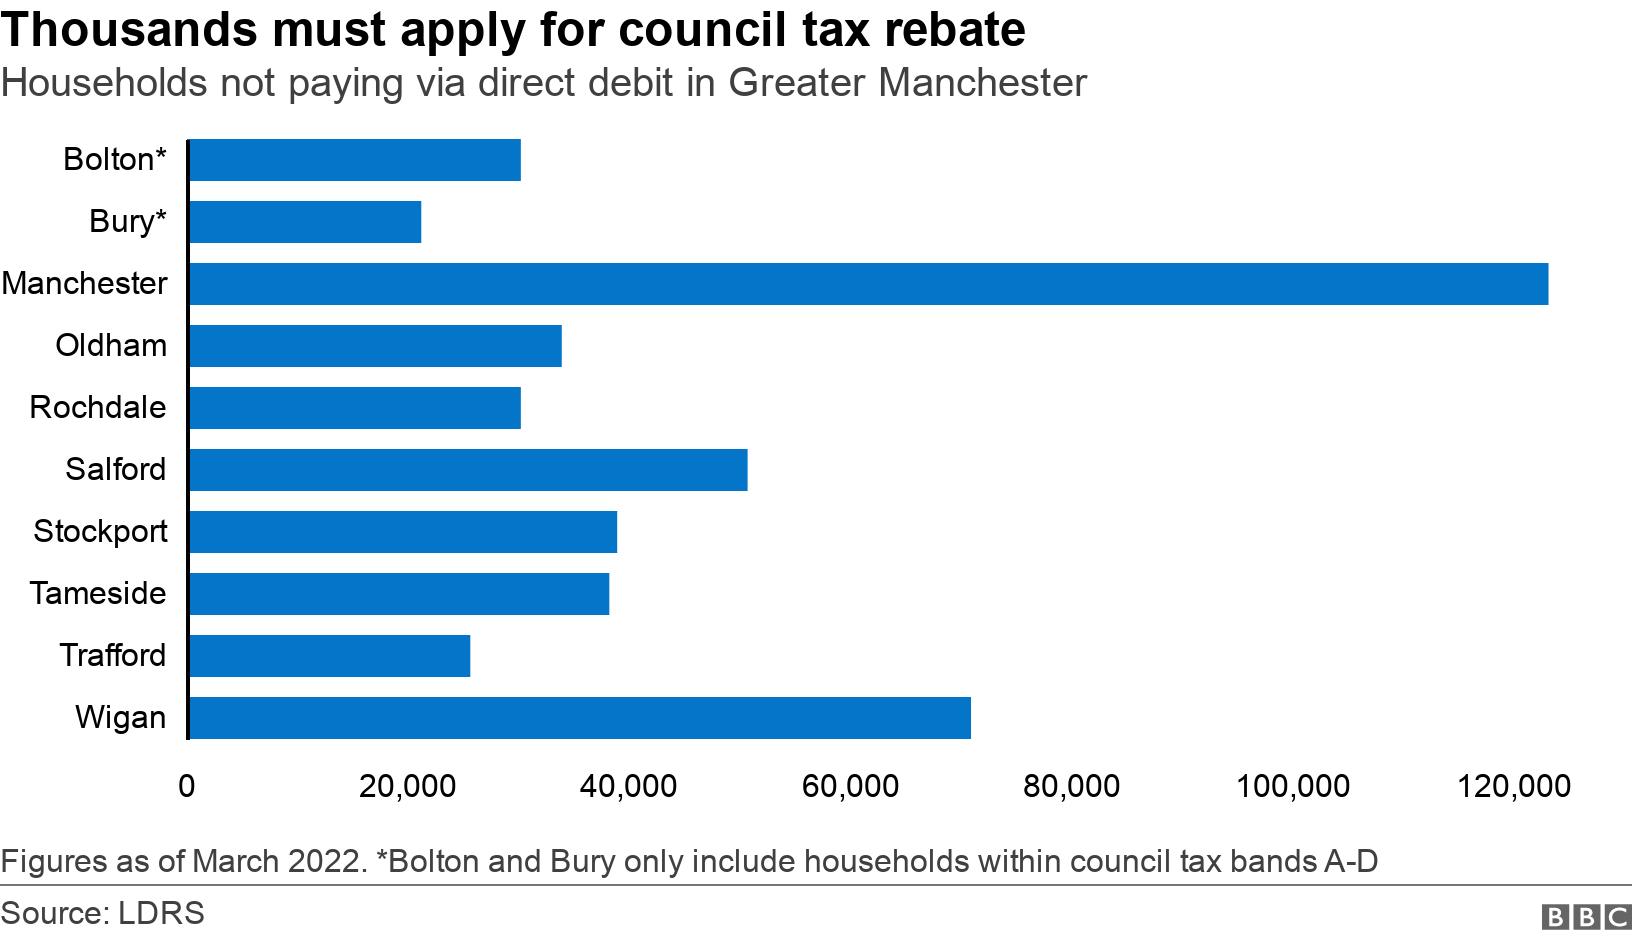 Thousands must apply for council tax rebate. Households not paying via direct debit in Greater Manchester. Number of households in Greater Manchester boroughs which do not pay council tax via direct debit and will therefore have to apply for the ₤150 rebate. Figures as of March 2022. *Bolton and Bury only include households within council tax bands A-D.